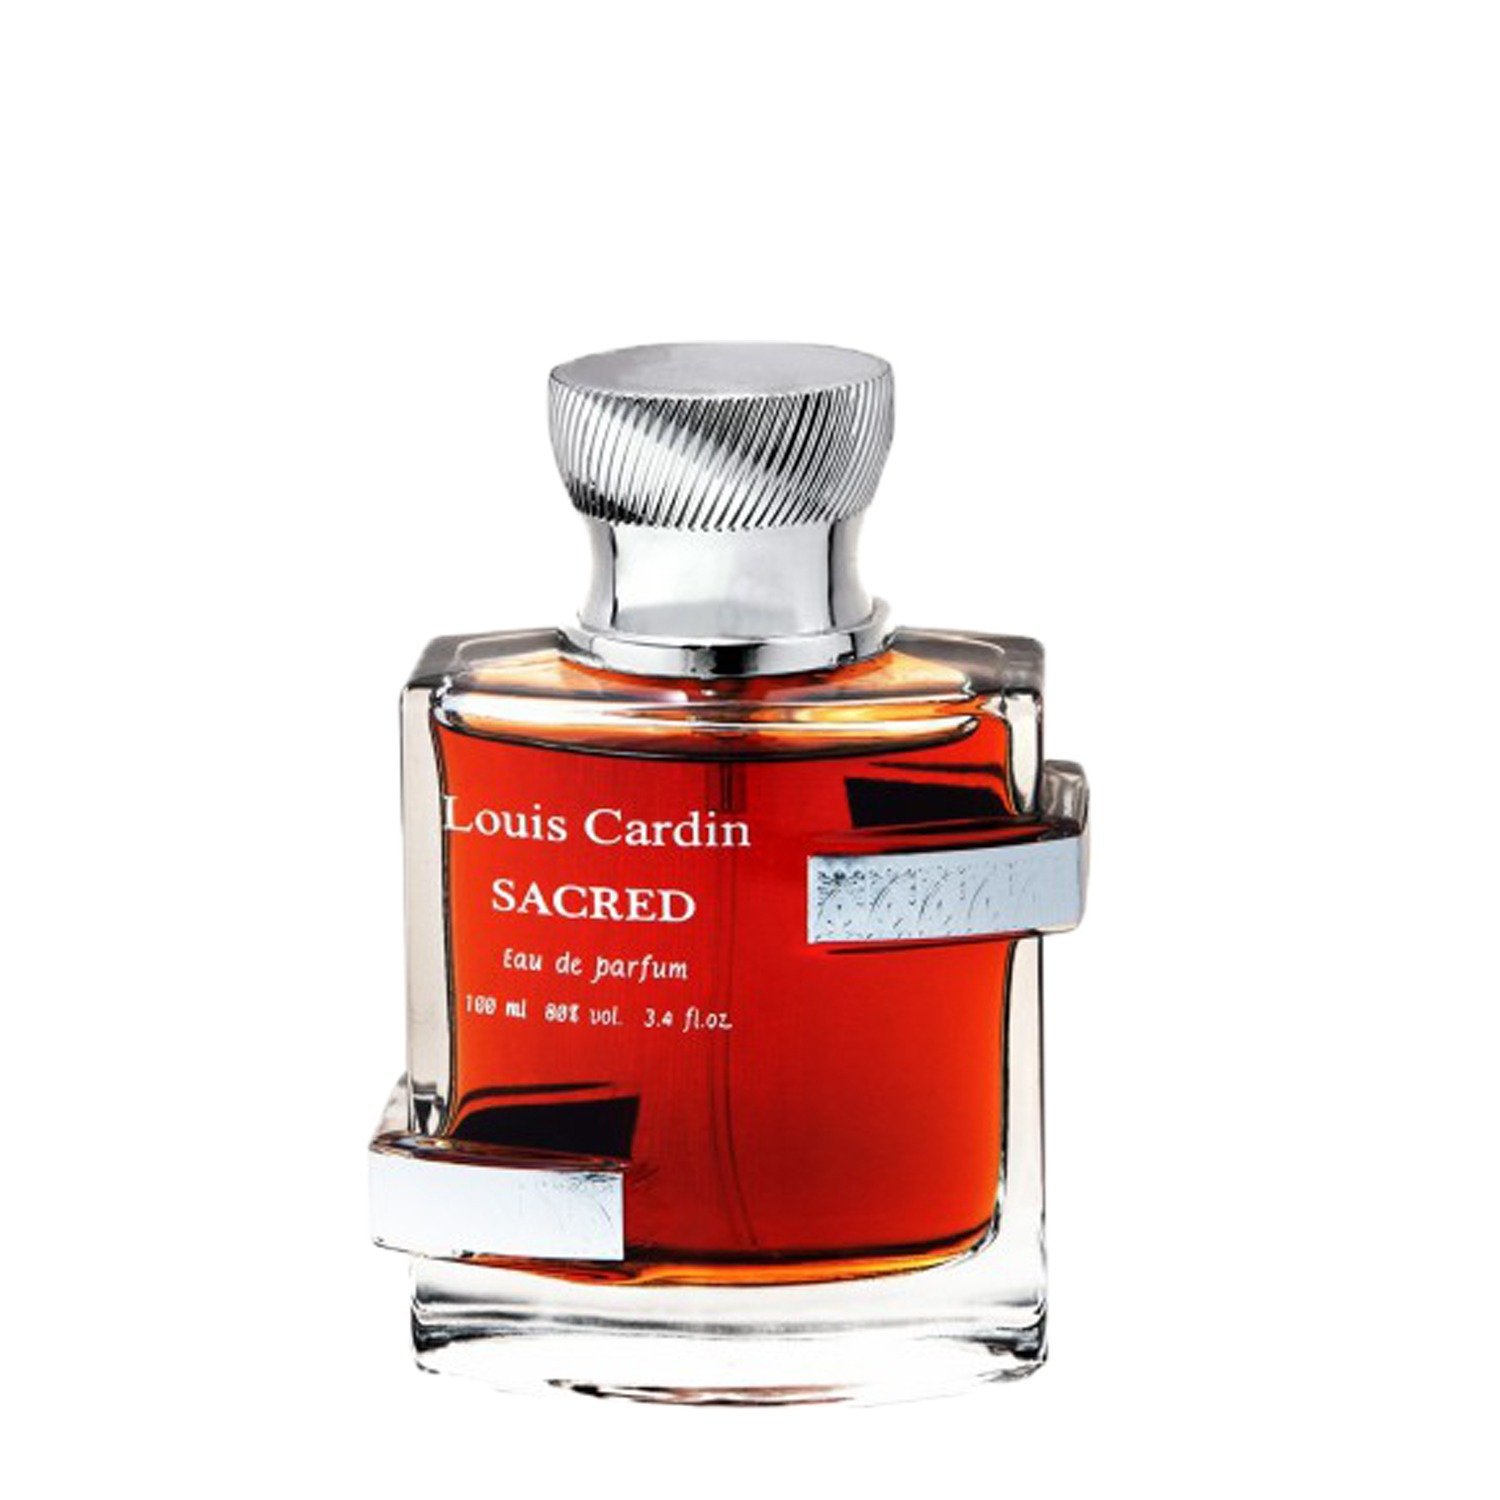 Sacred by Louis Cardin » Reviews & Perfume Facts